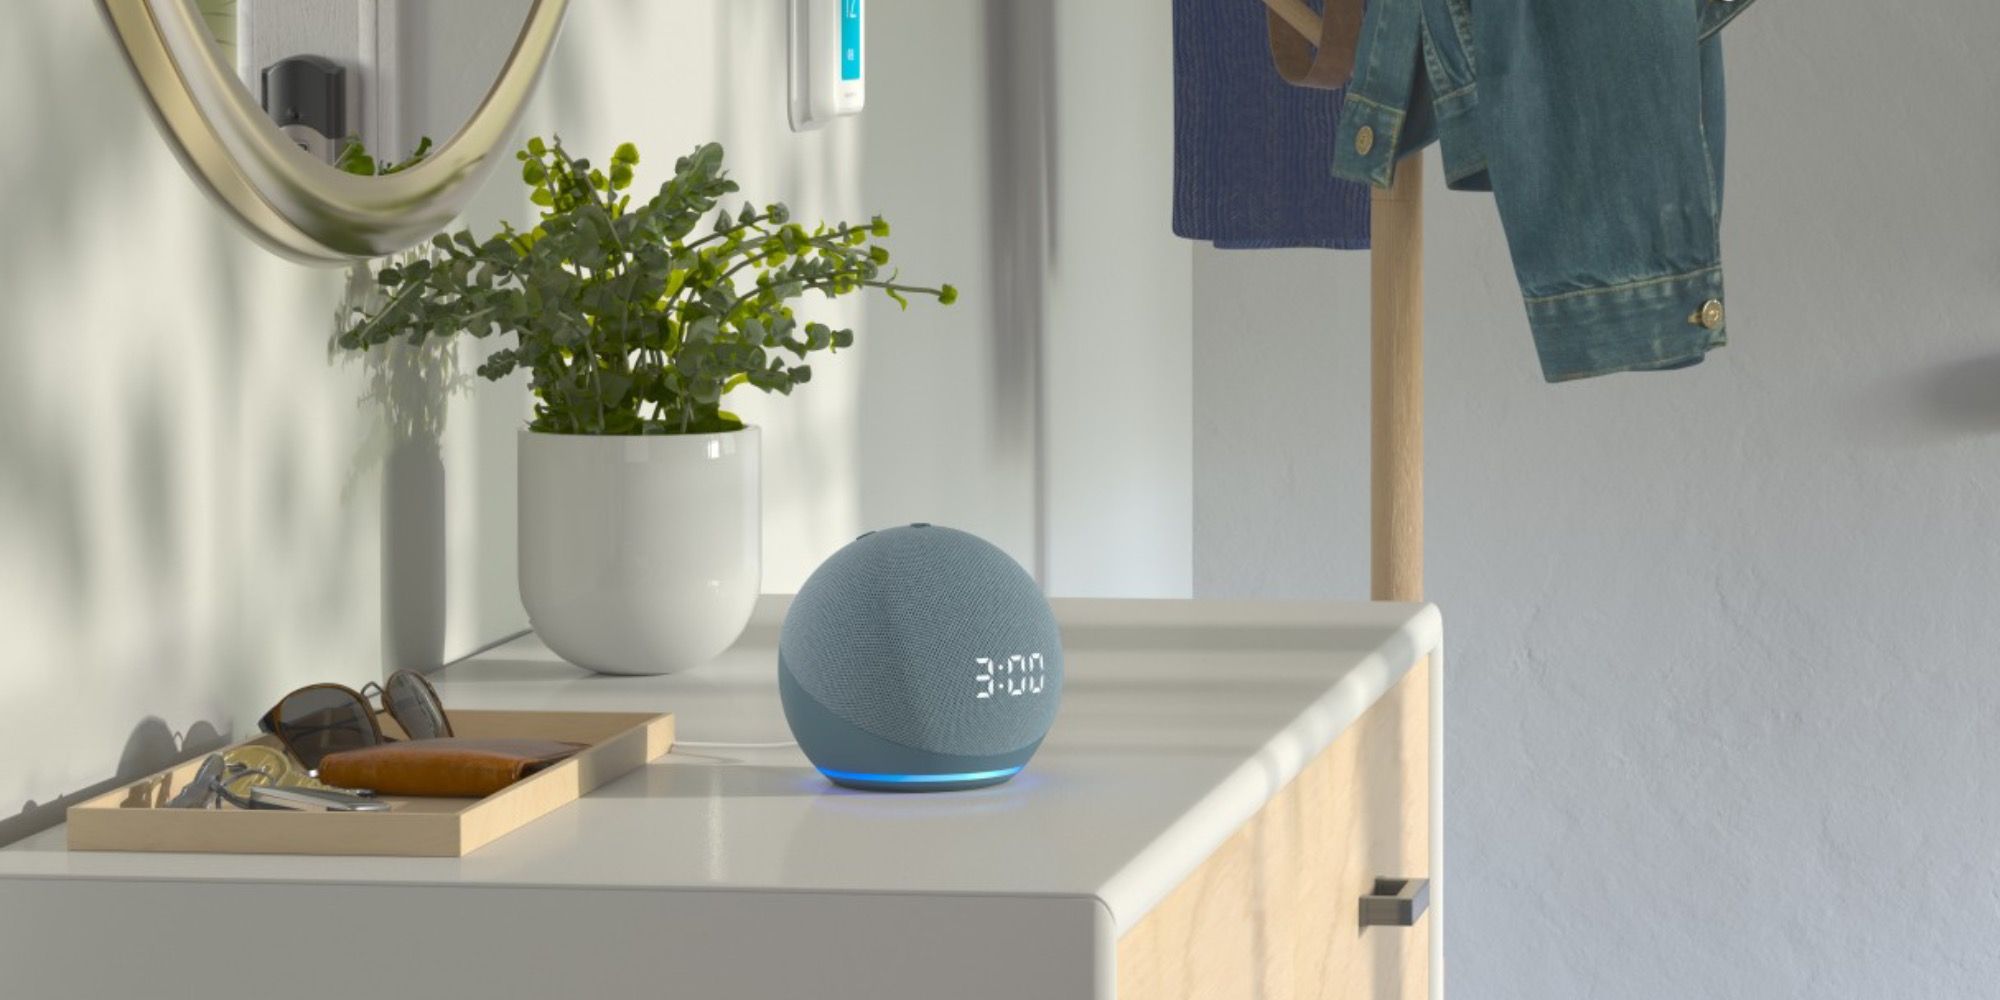 s Echo Dot smart speakers are HALF PRICE in this 2021 Prime Day deal